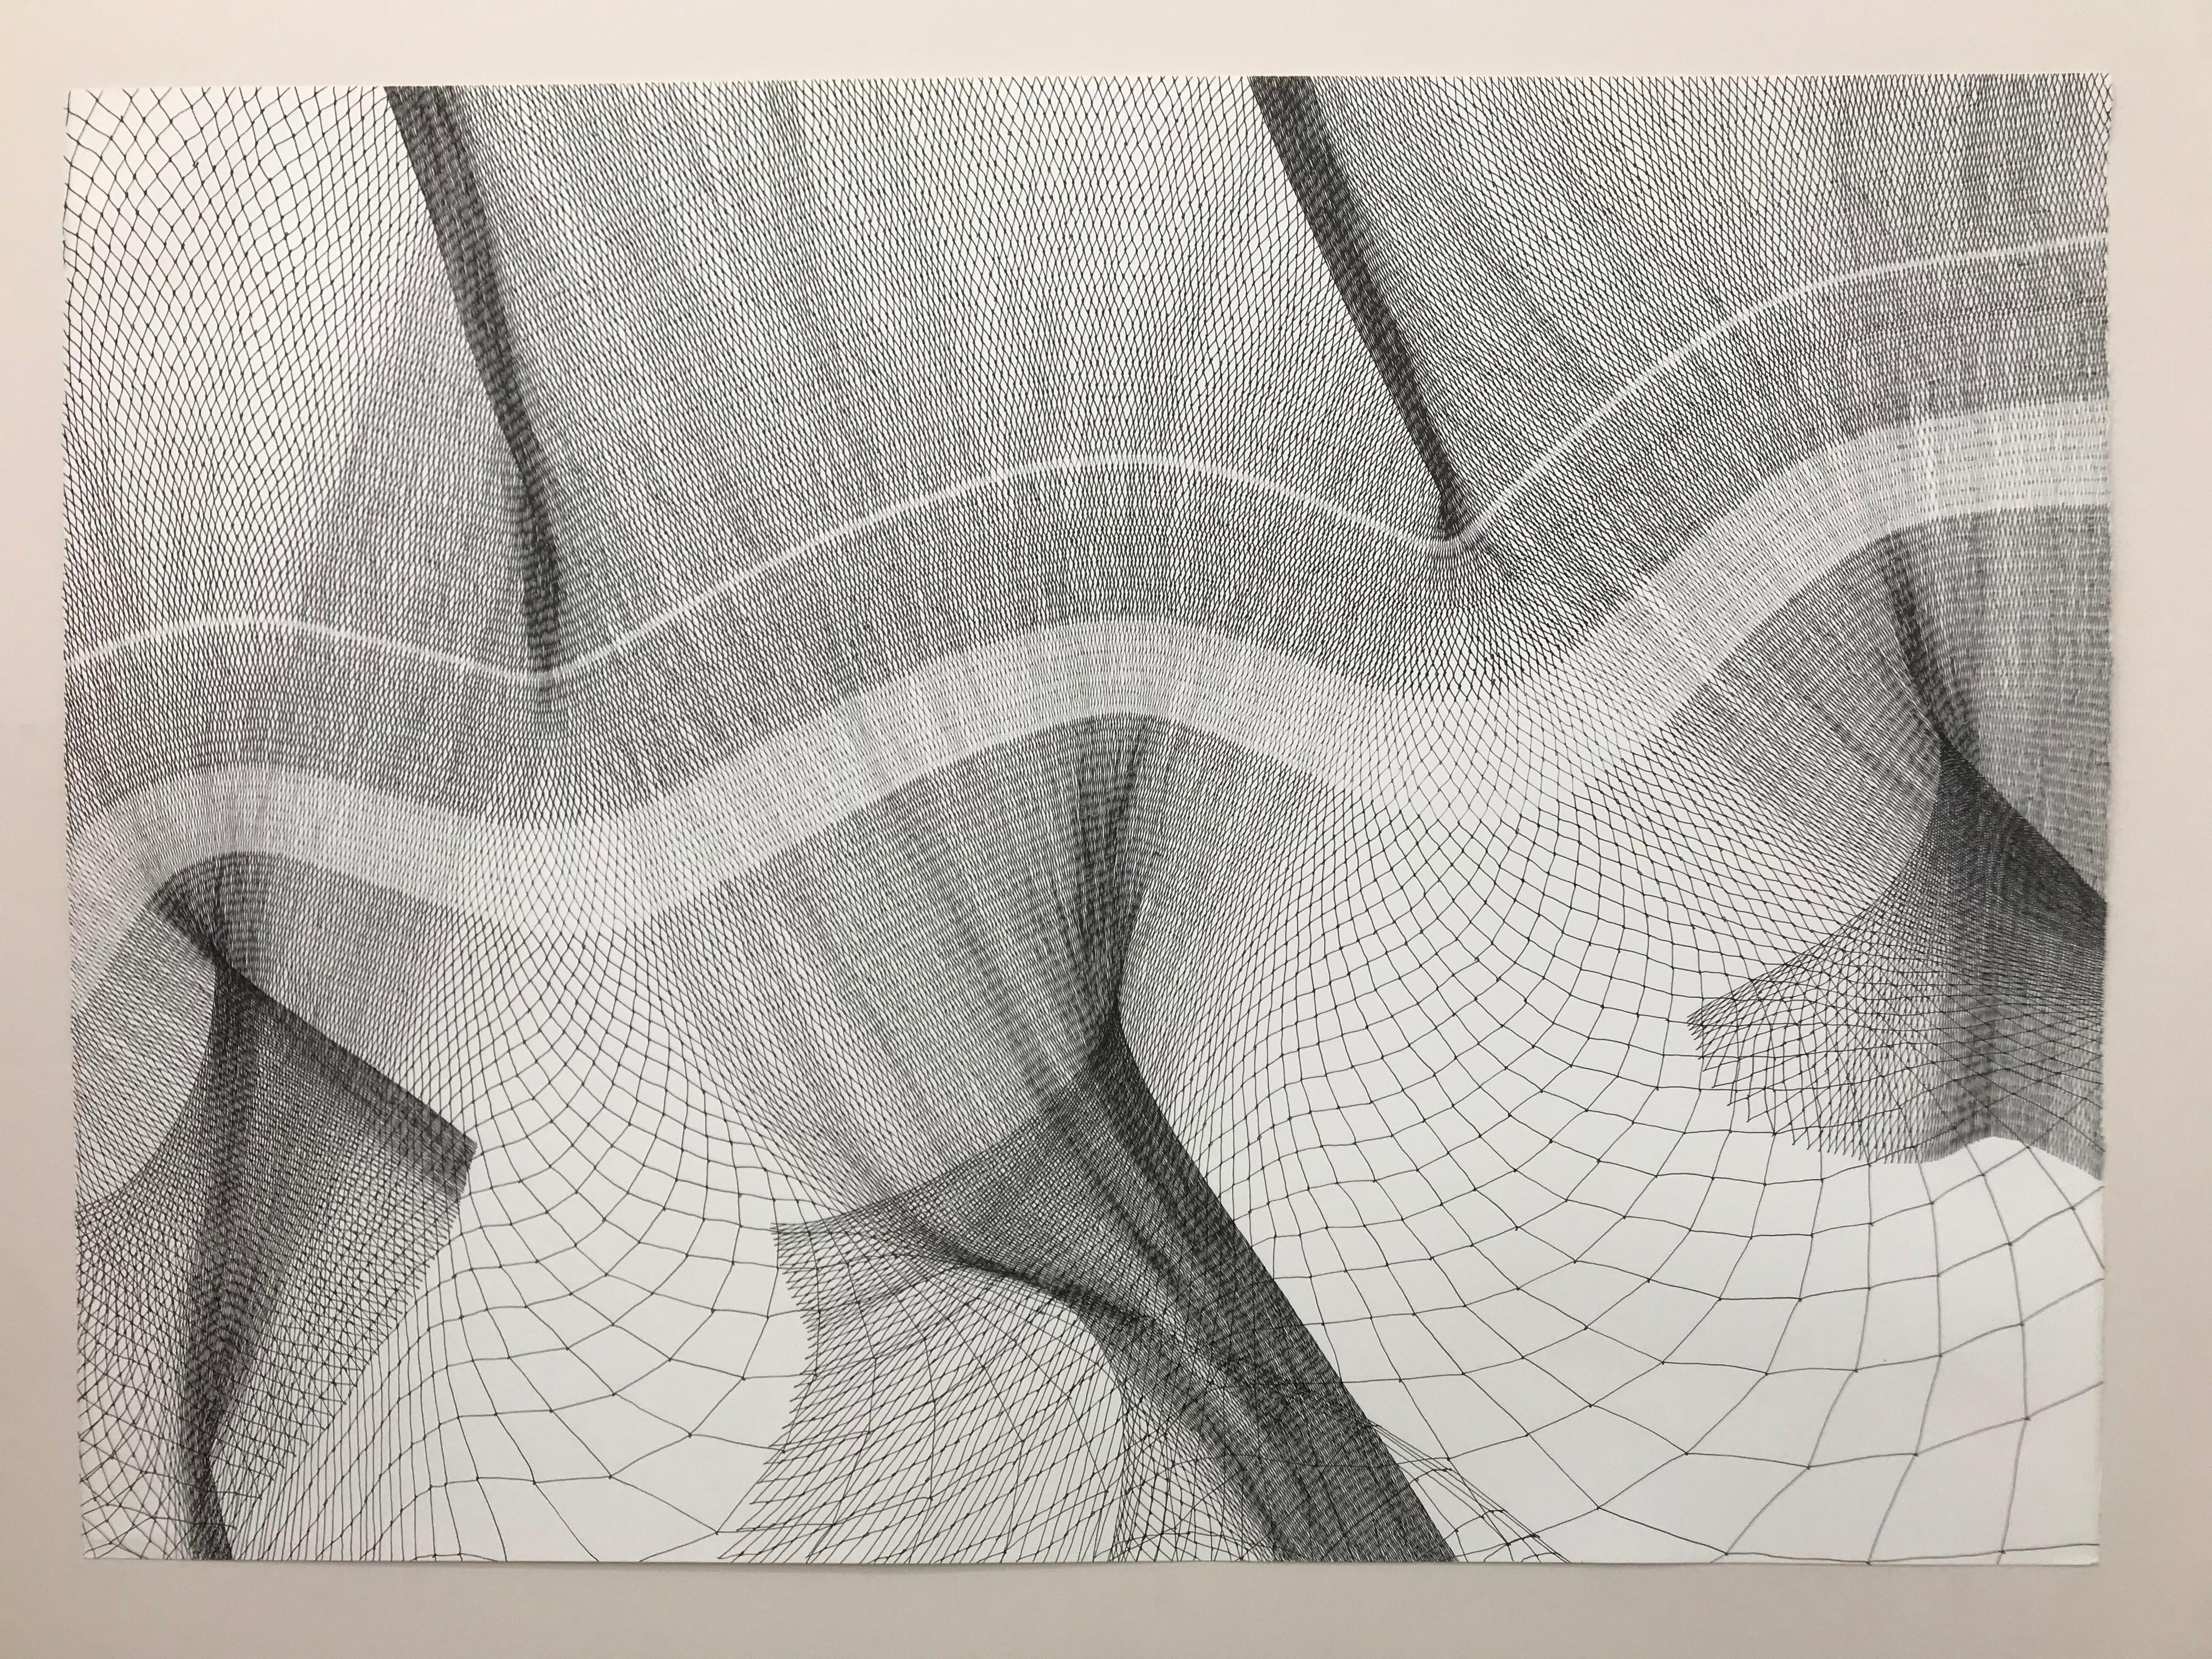 Jiratchaya Pripwai Abstract Drawing - Fluidity 2 pen on paper, black and white drawing, optical illusion artwork